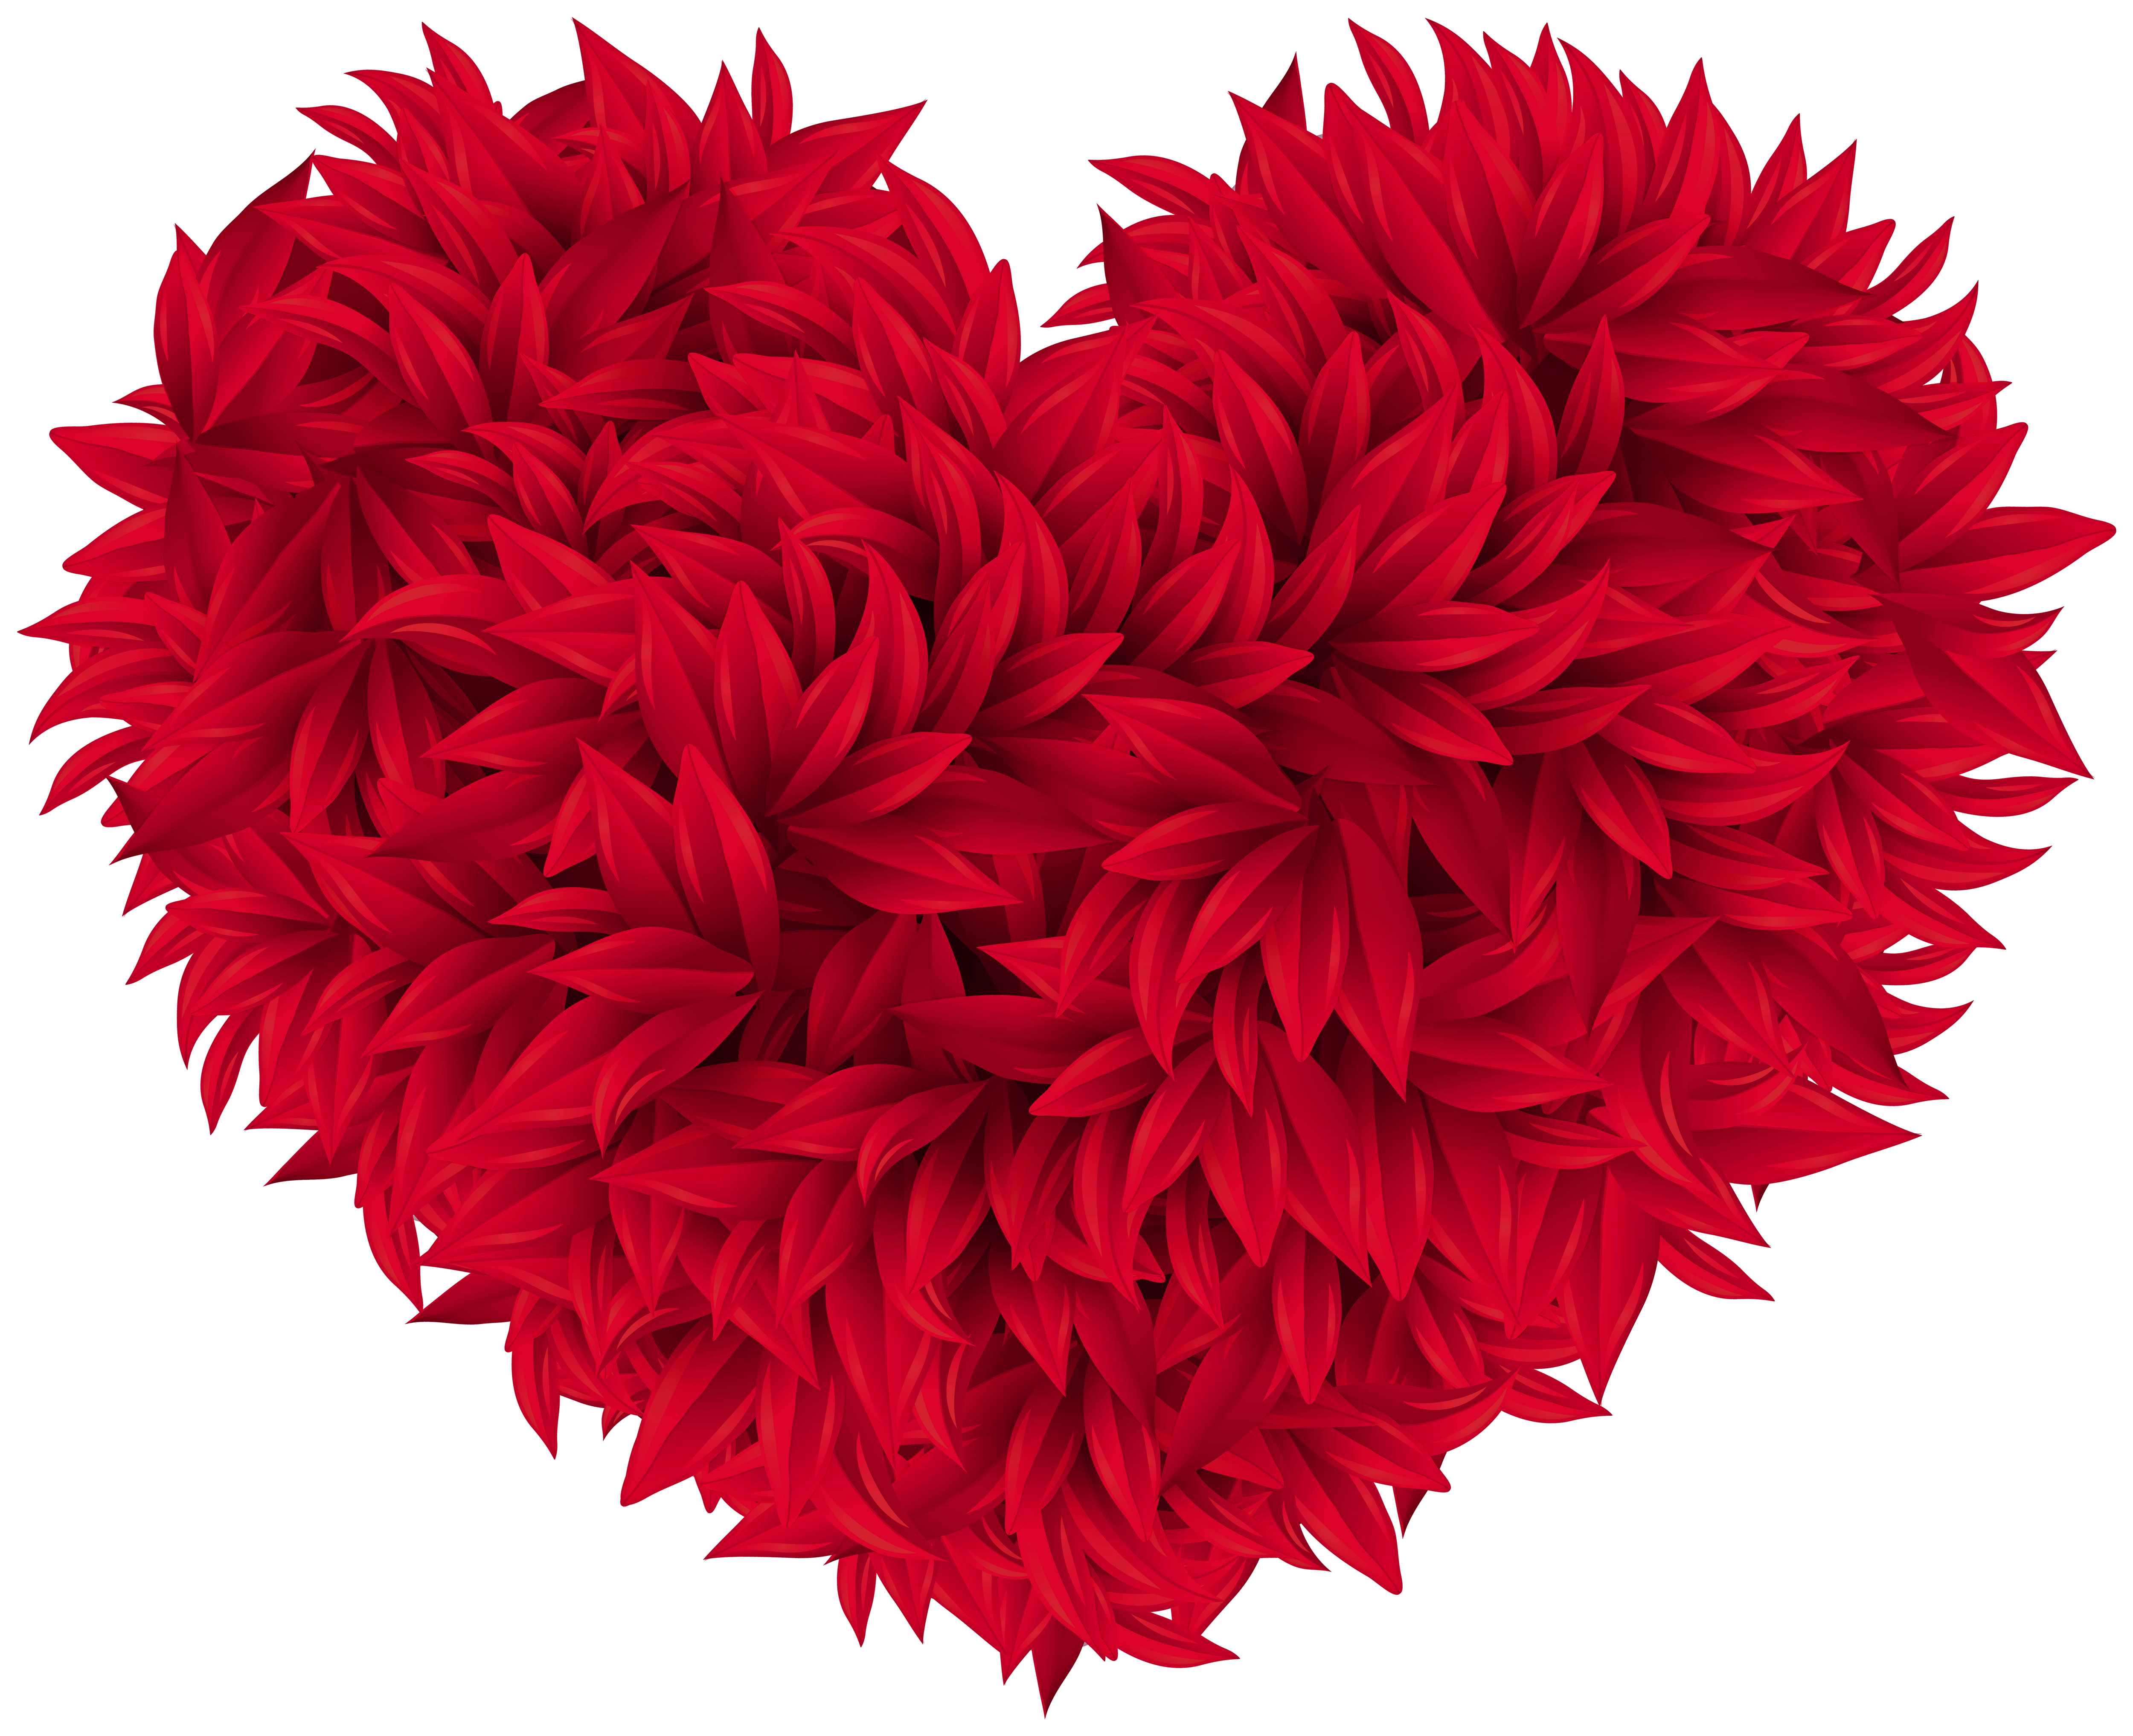 red hearts​  Gallery Yopriceville - High-Quality Free Images and